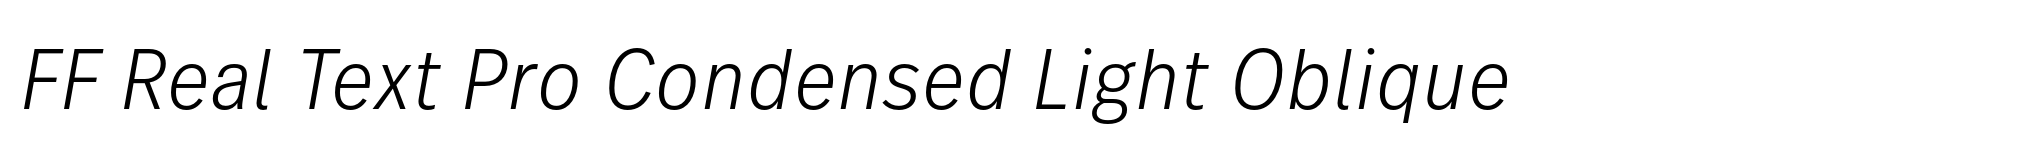 FF Real Text Pro Condensed Light Oblique image